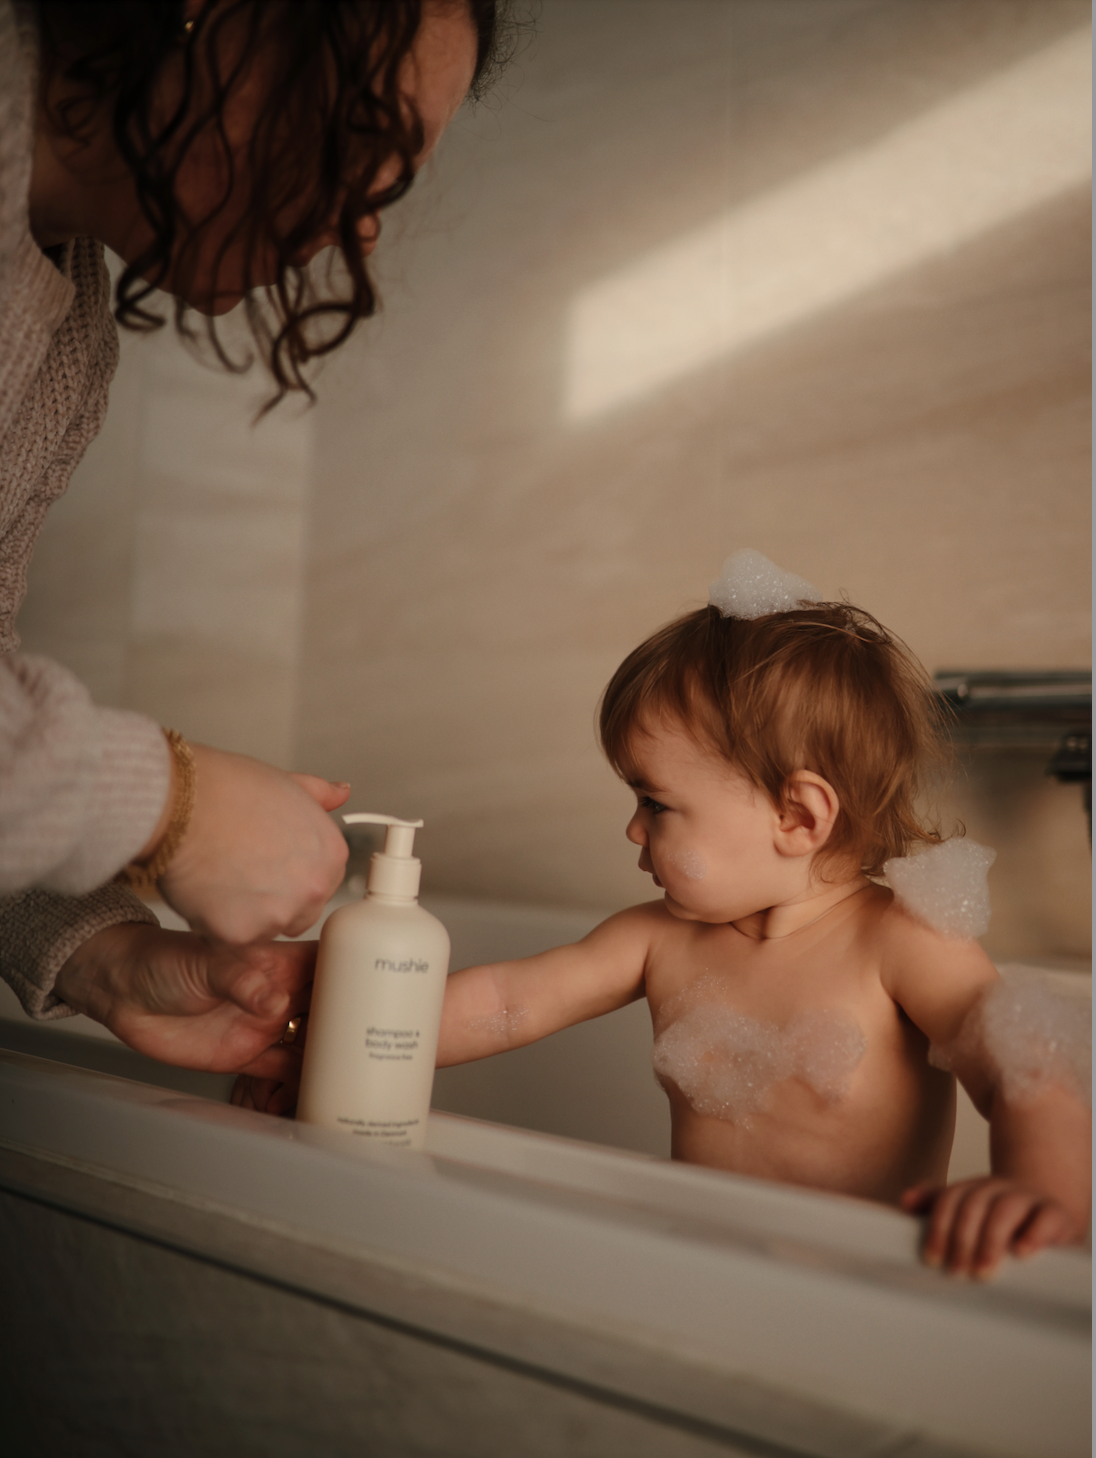 shampoo & body wash, fragrance free, from Mushie. Baby in bathtub with mother.